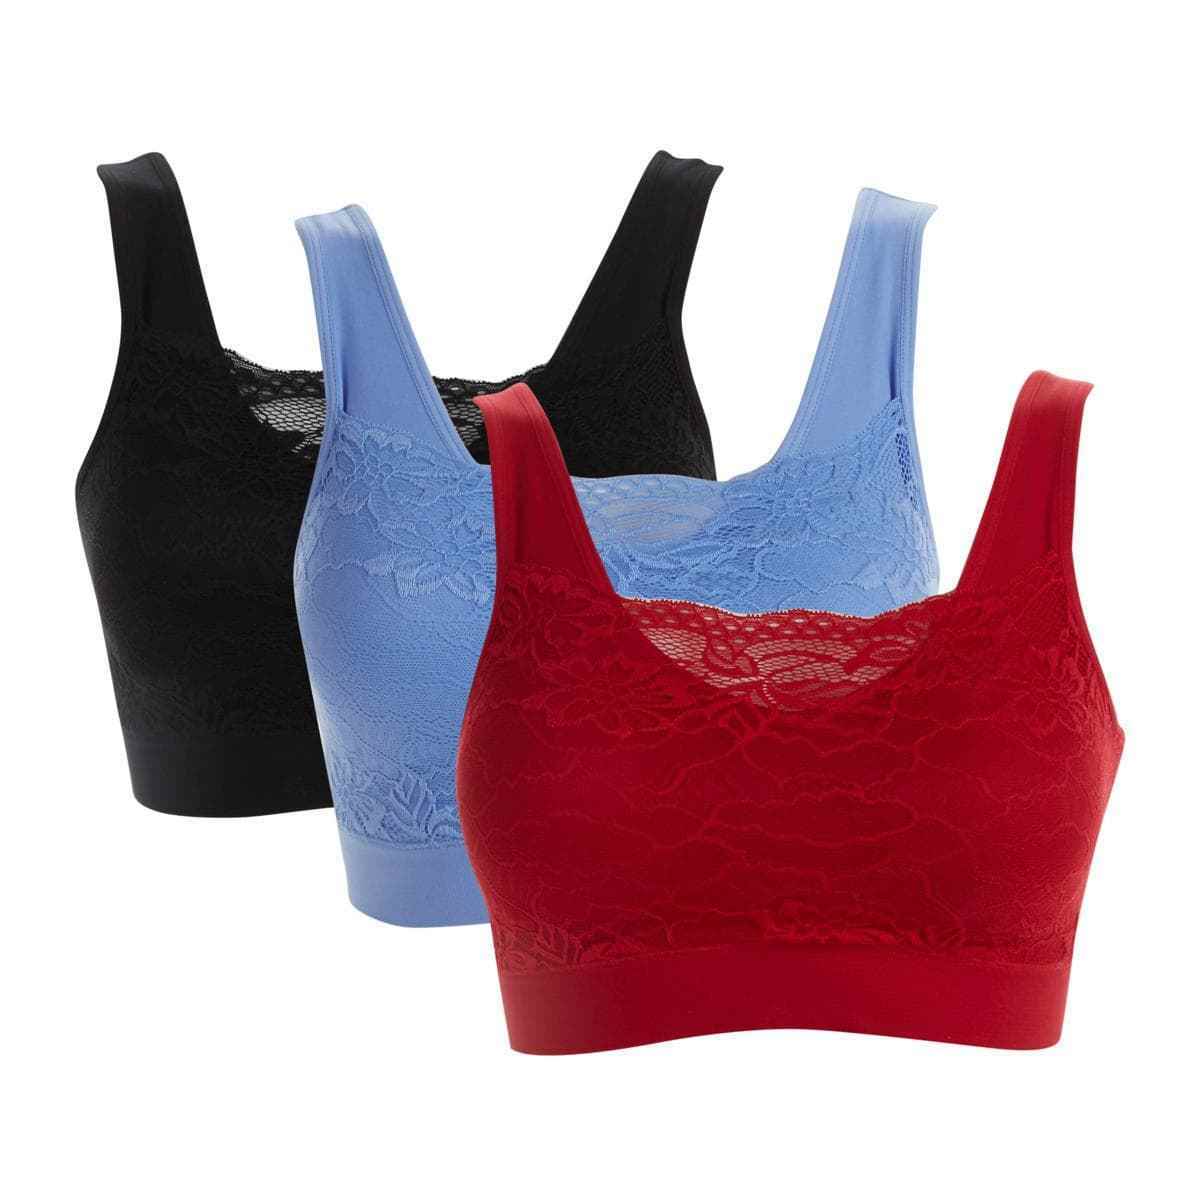 Rhonda Shear Lace Overlay Molded Cup Bra 2 Pack